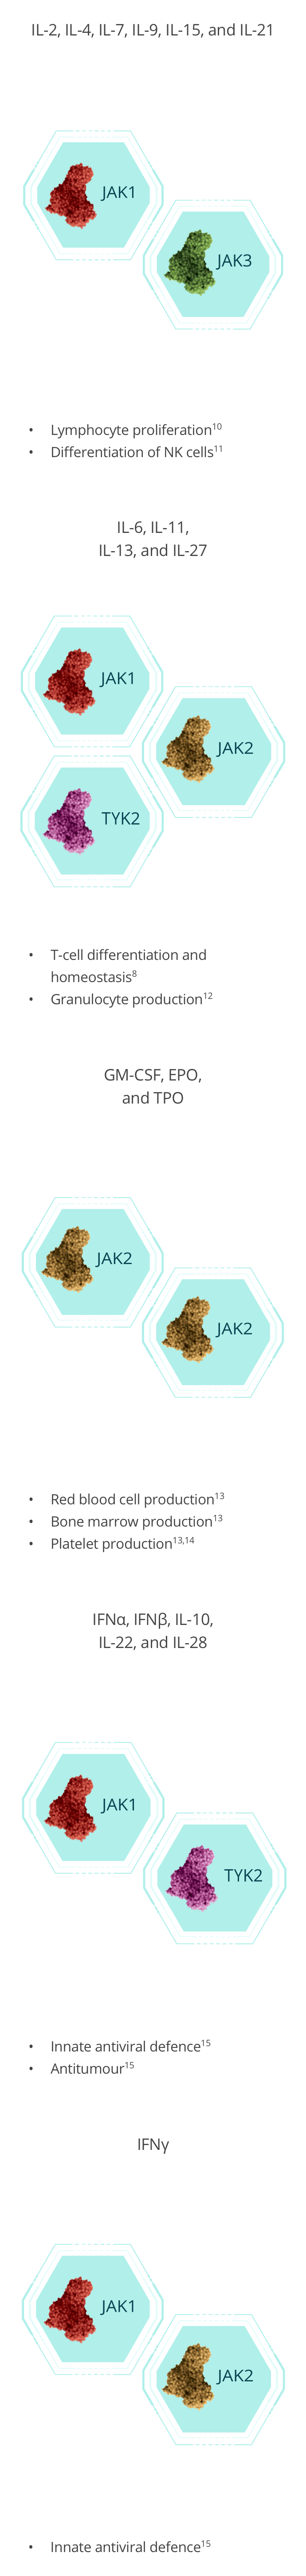 Key cytokines of the JAKSTAT pathway infographic